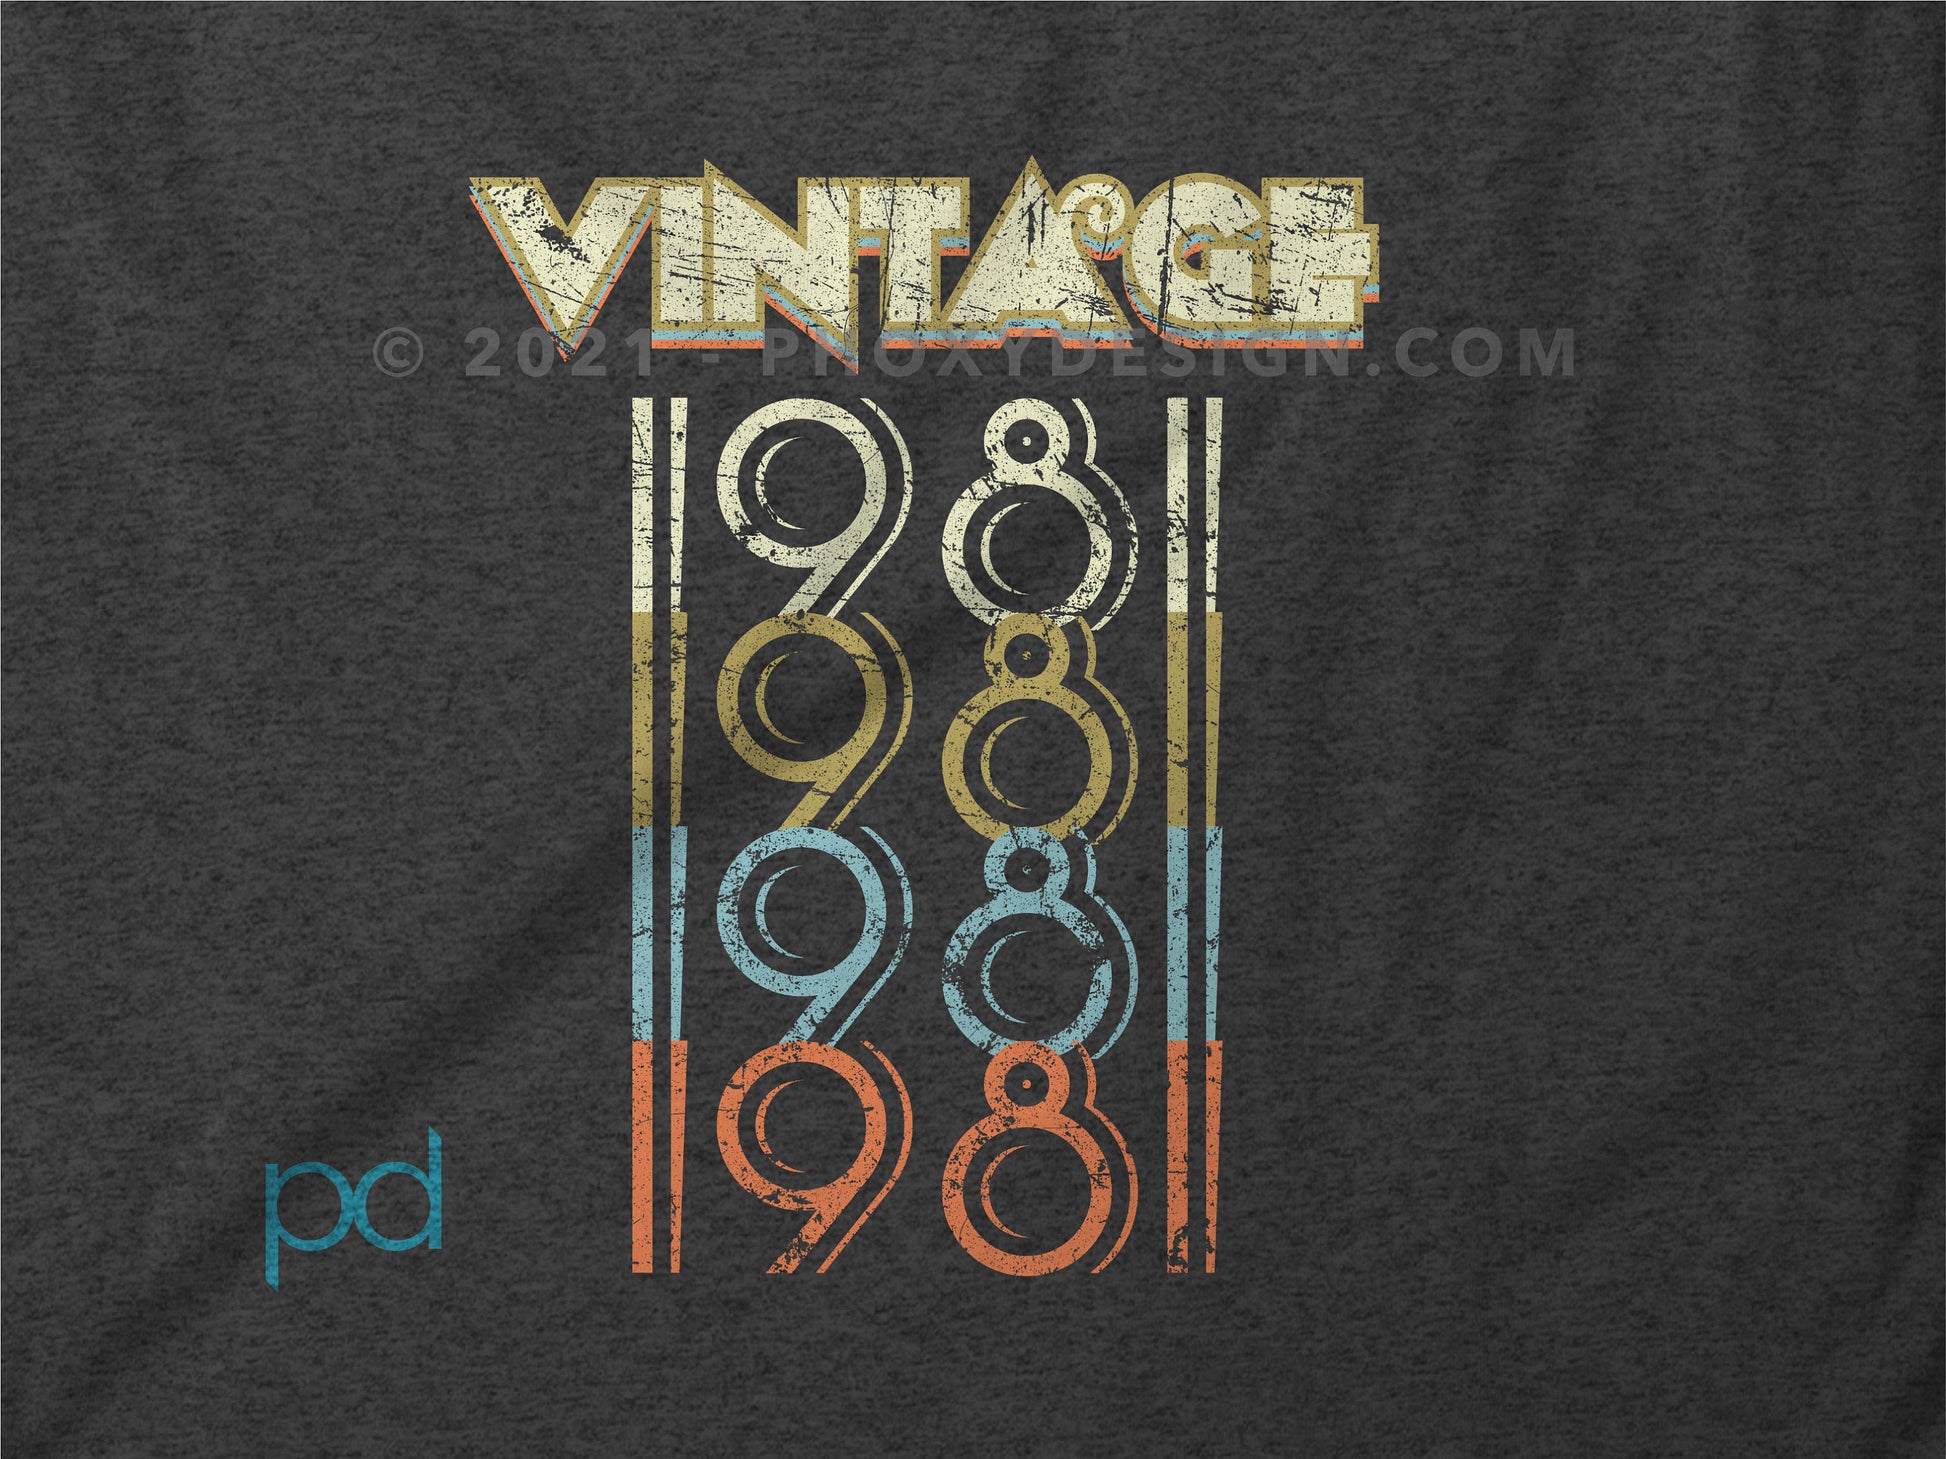 40th Birthday Gift, Vintage 1981 T Shirt 70s style for Men or Women Unisex Jersey Short Sleeve Tee Shirt Top